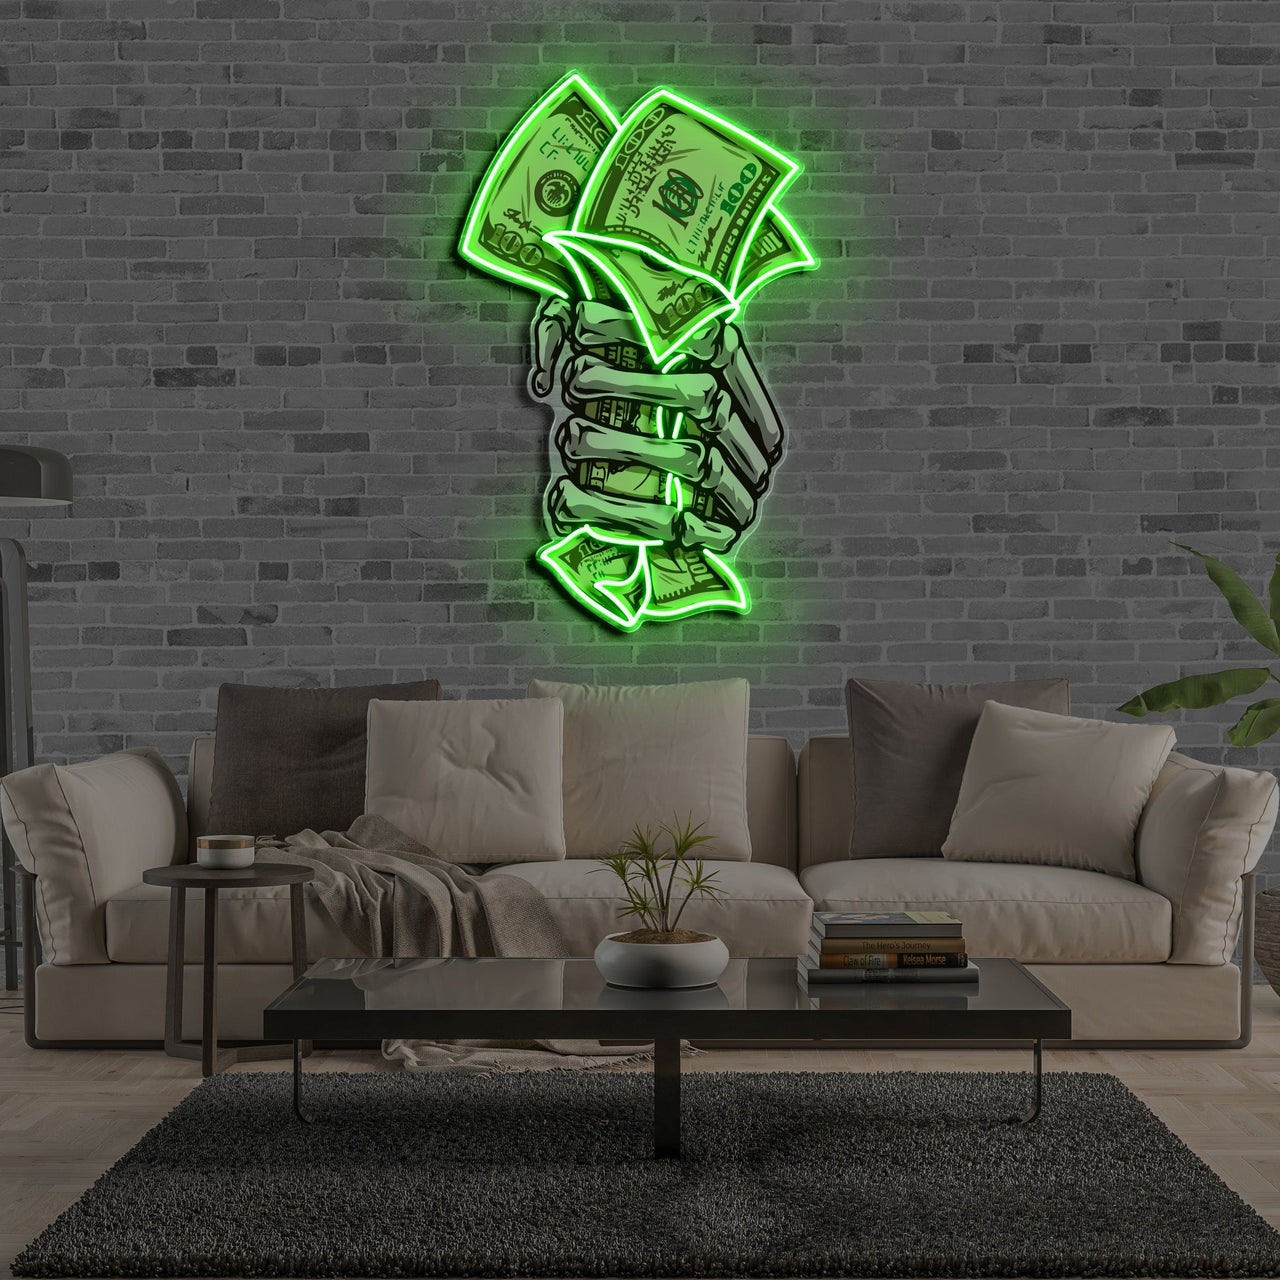 "Take my Money" Neon x Acrylic Artwork by Neon Icons